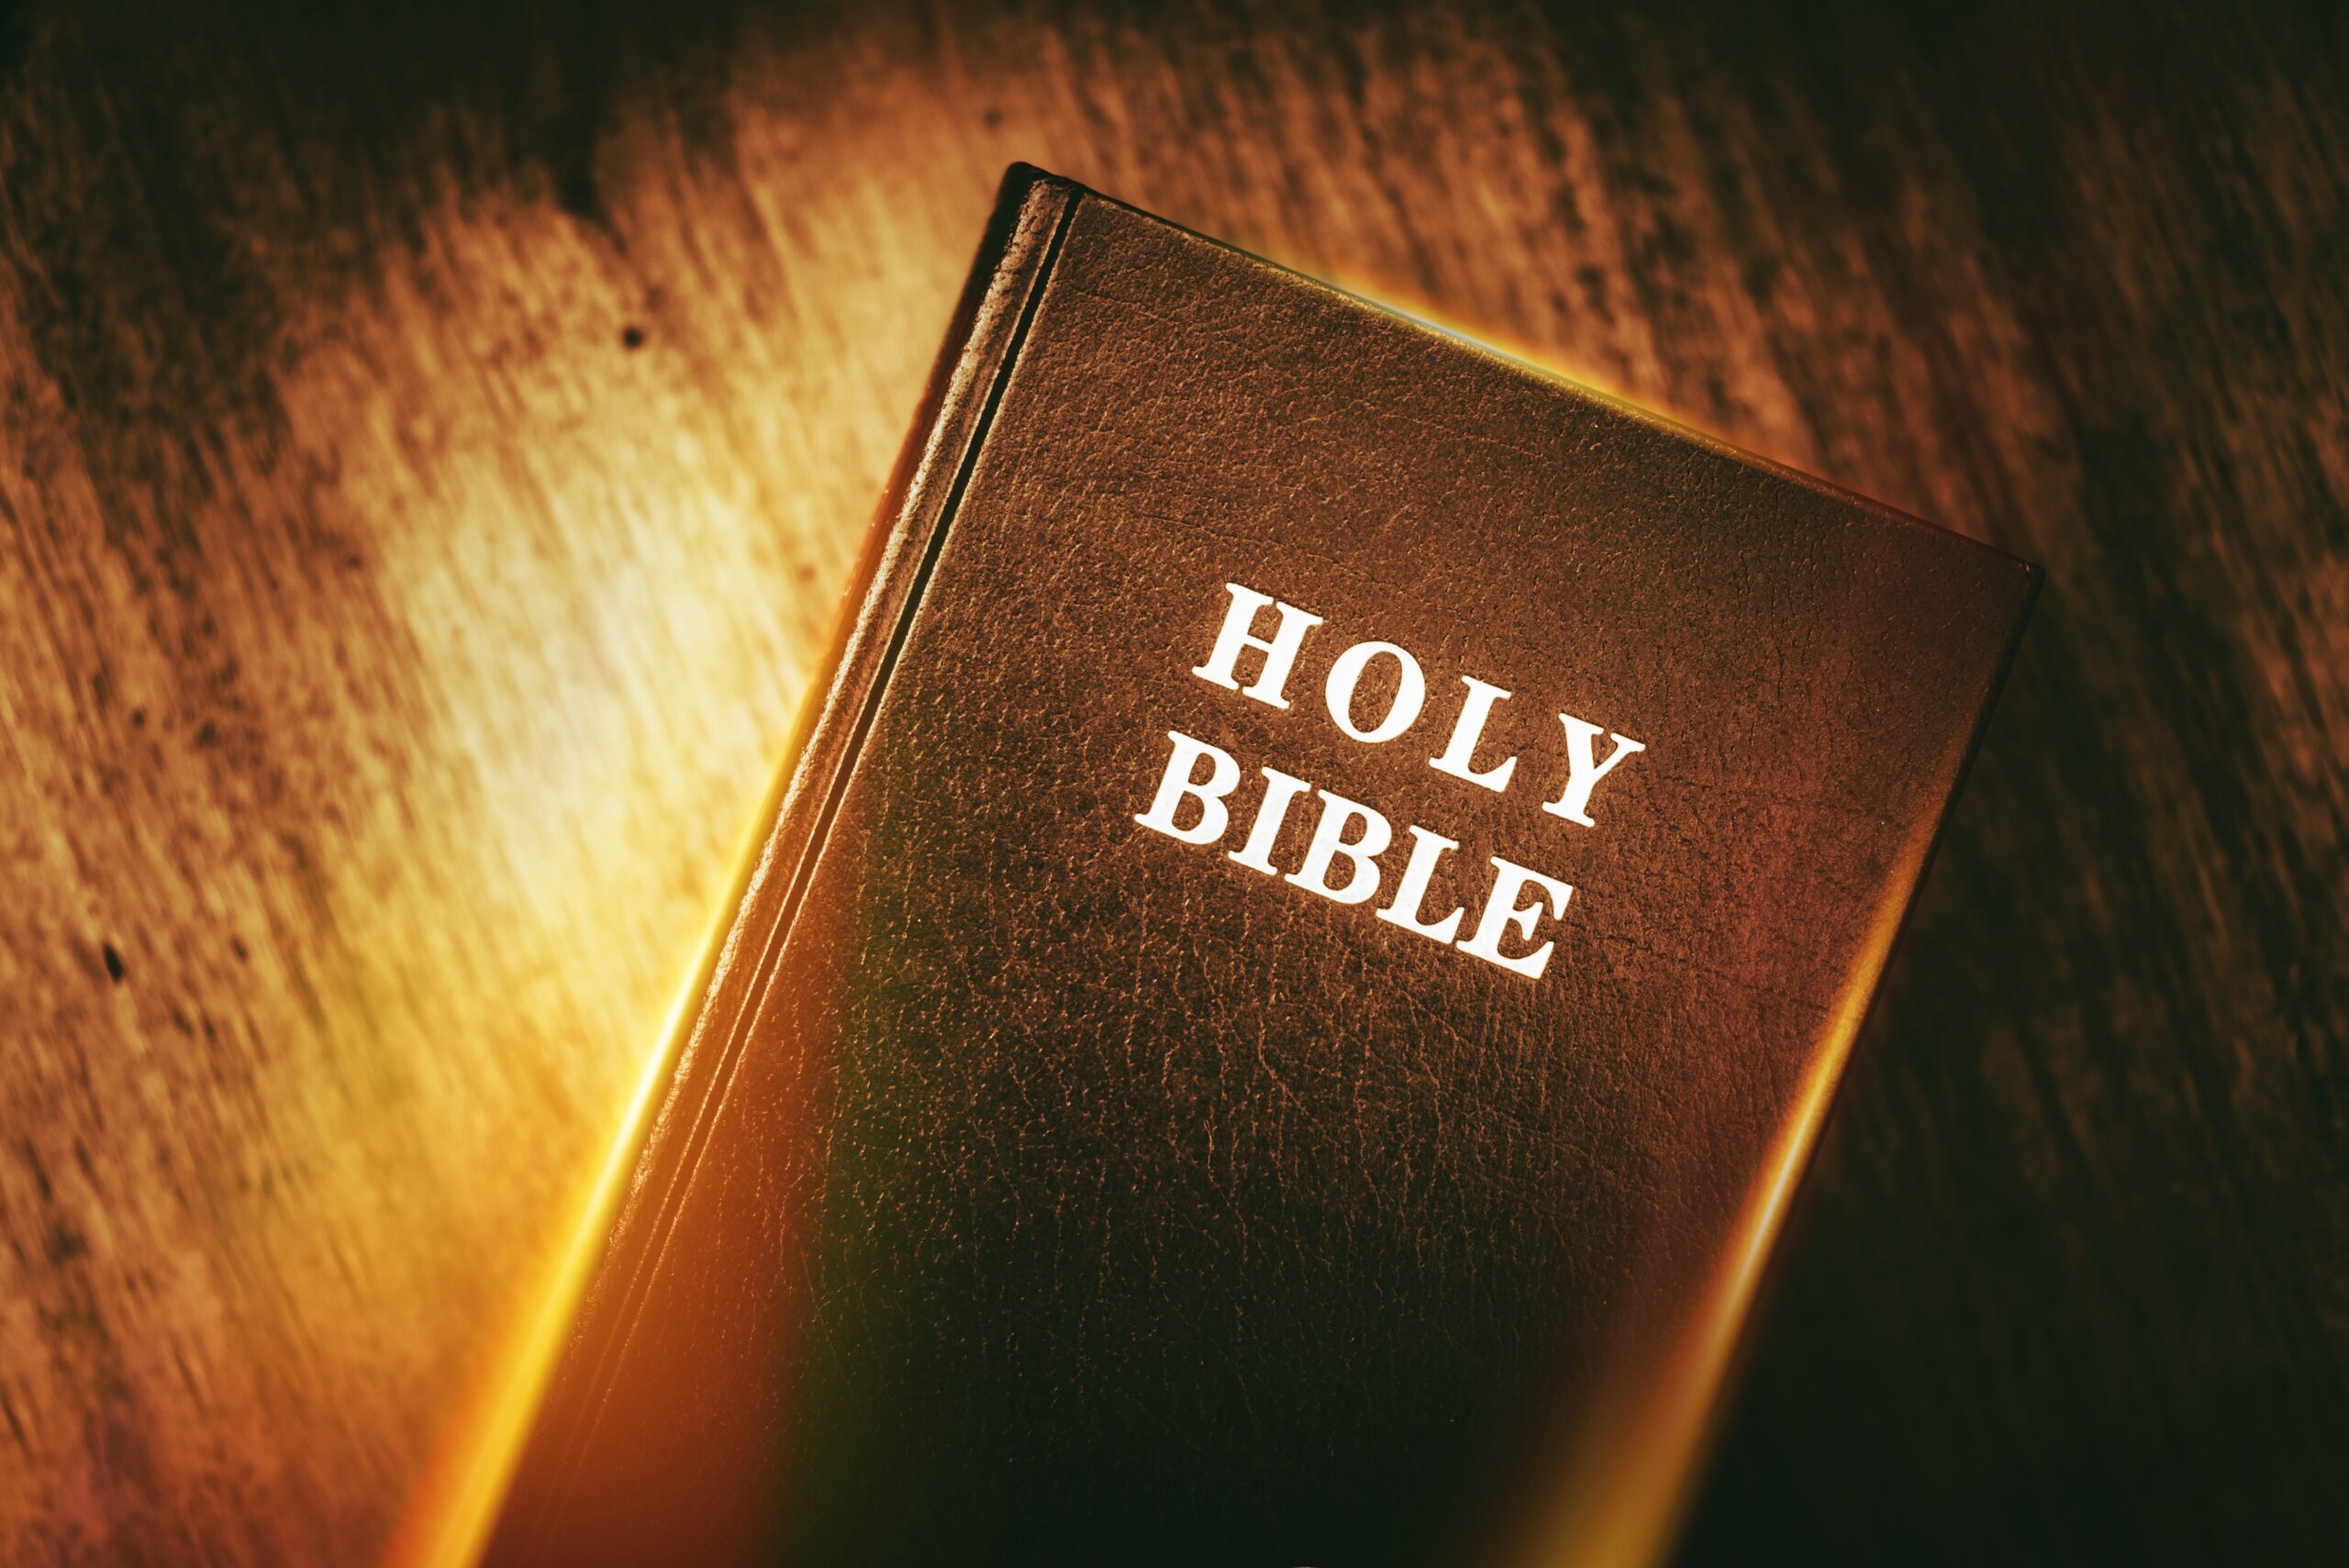 Some American schools ban Bible for ‘vulgarity and violence’